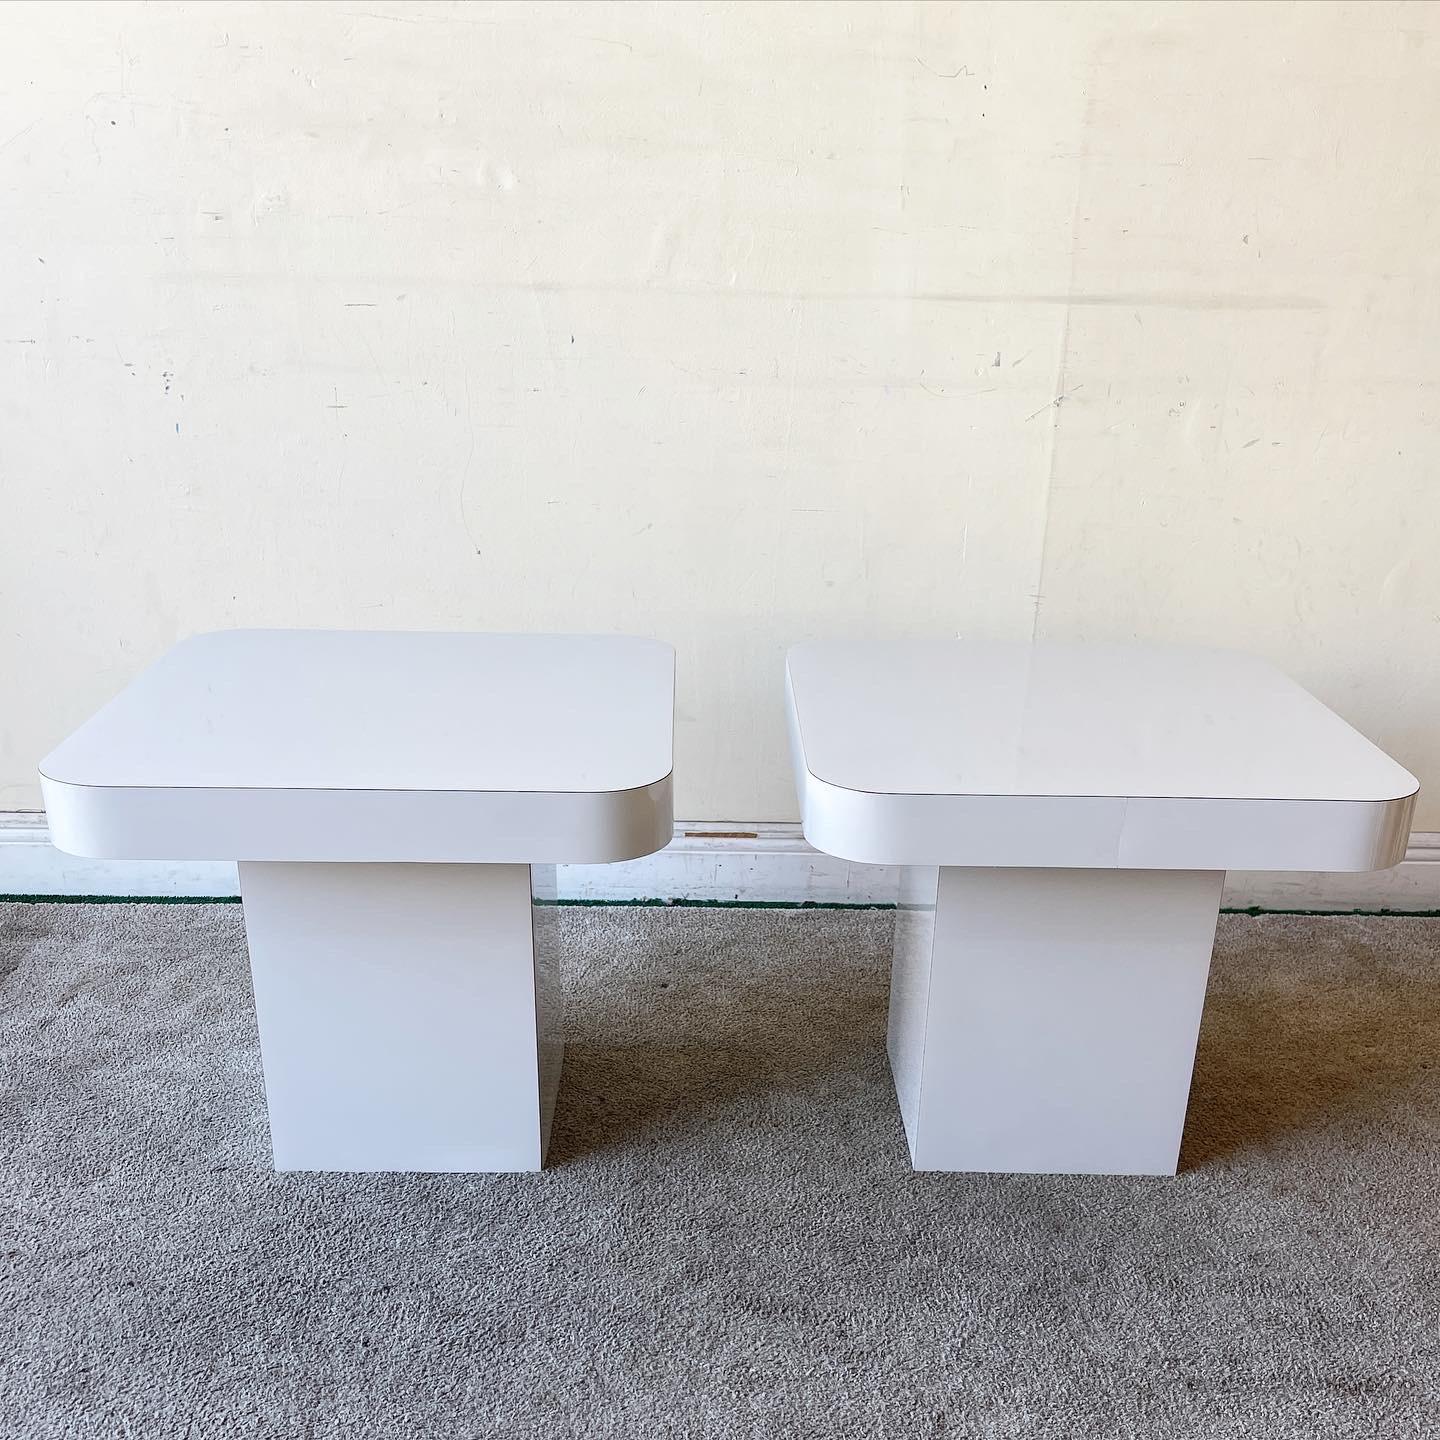 Wood Postmodern Light Gray Lacquer Laminate Mushroom Side Tables - a Pair For Sale